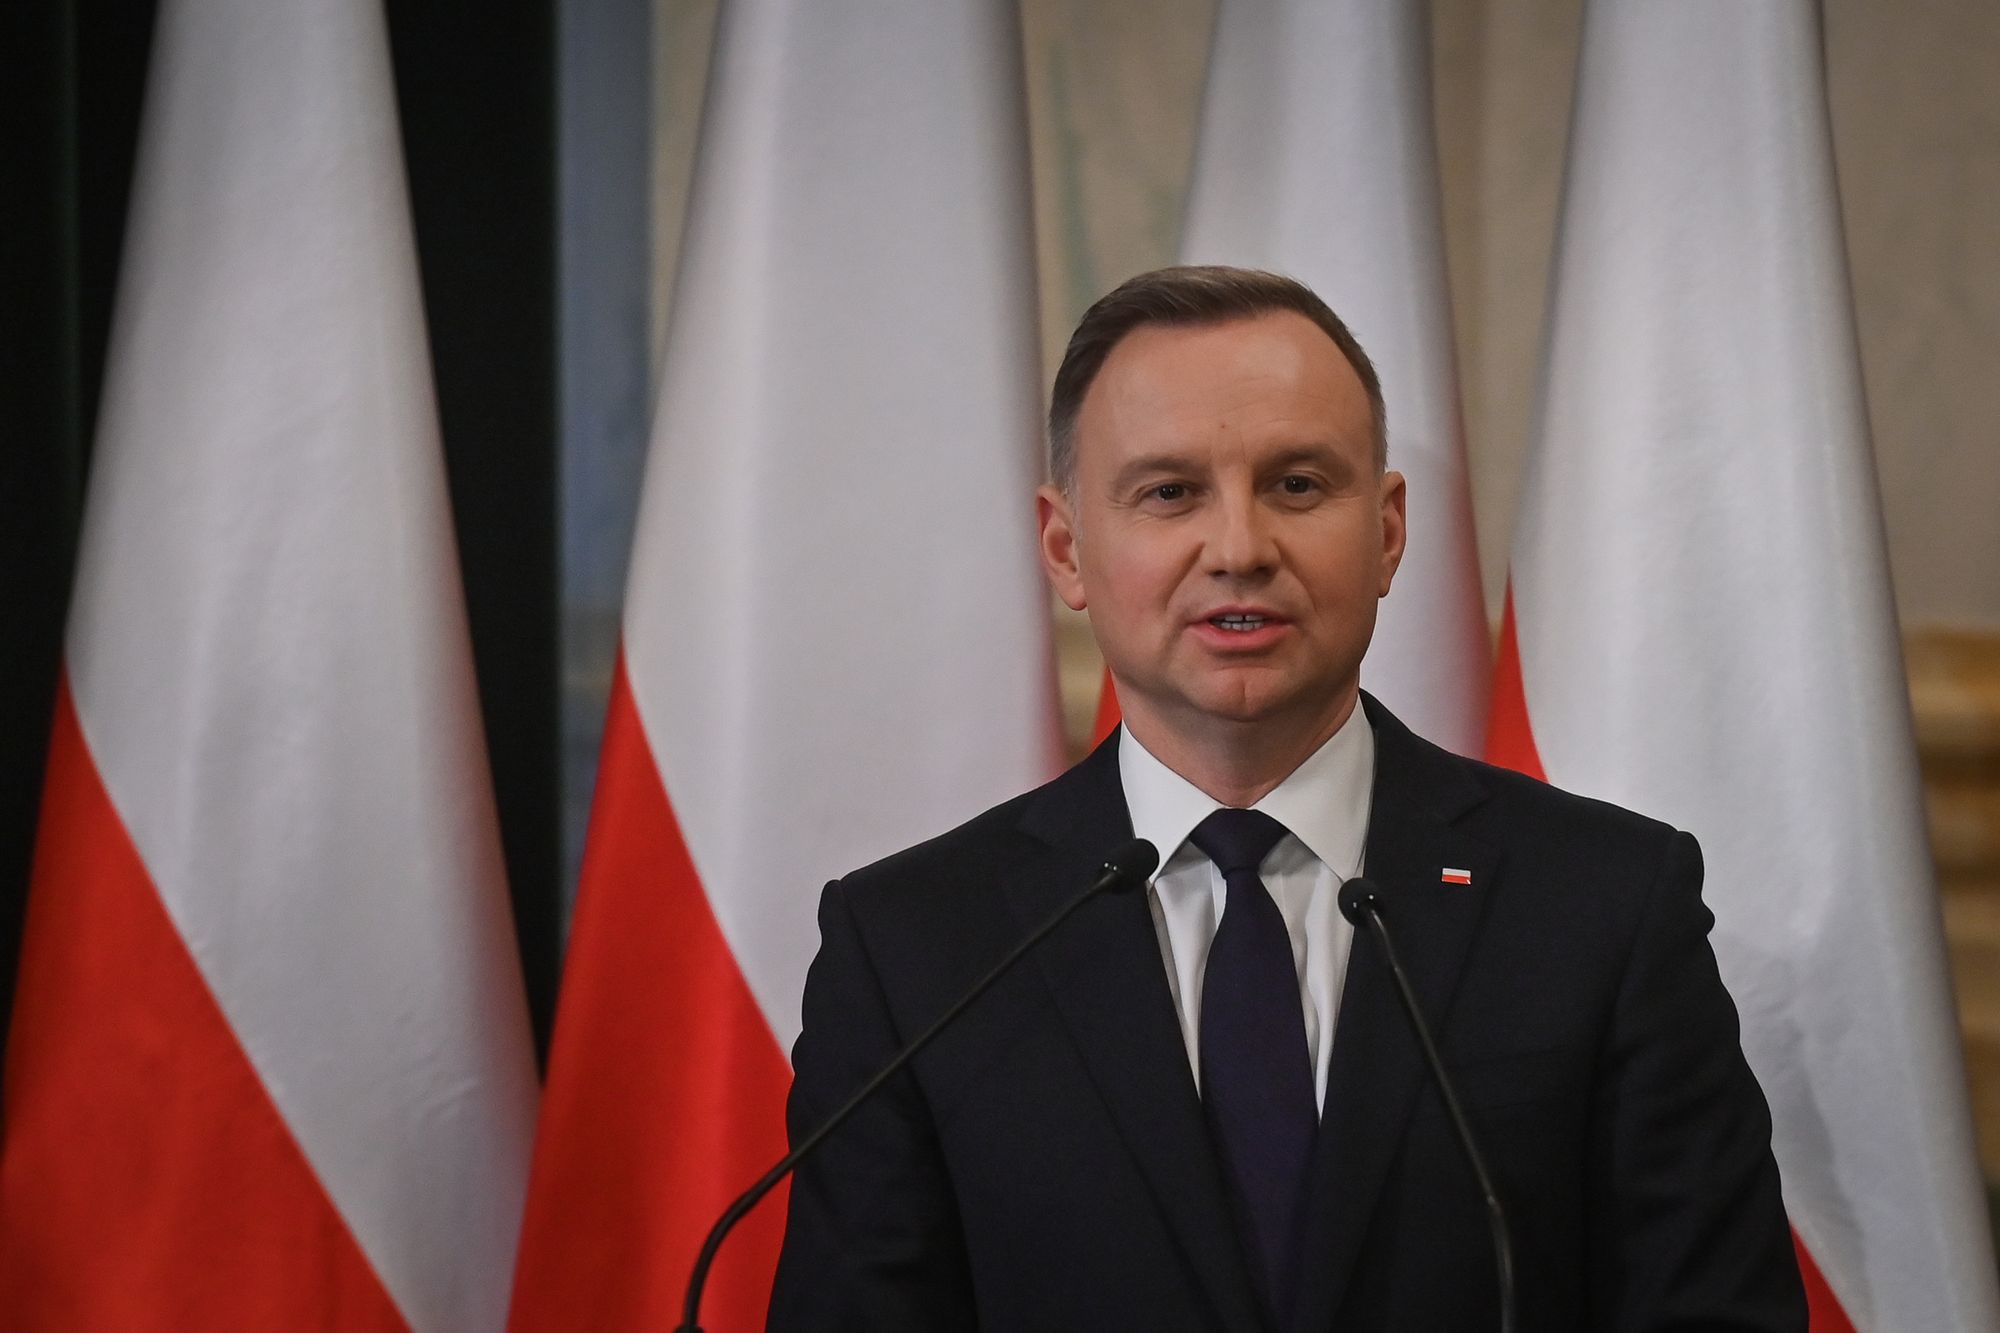 Polish Foreign Ministry criticizes Duda over nuclear sharing comments